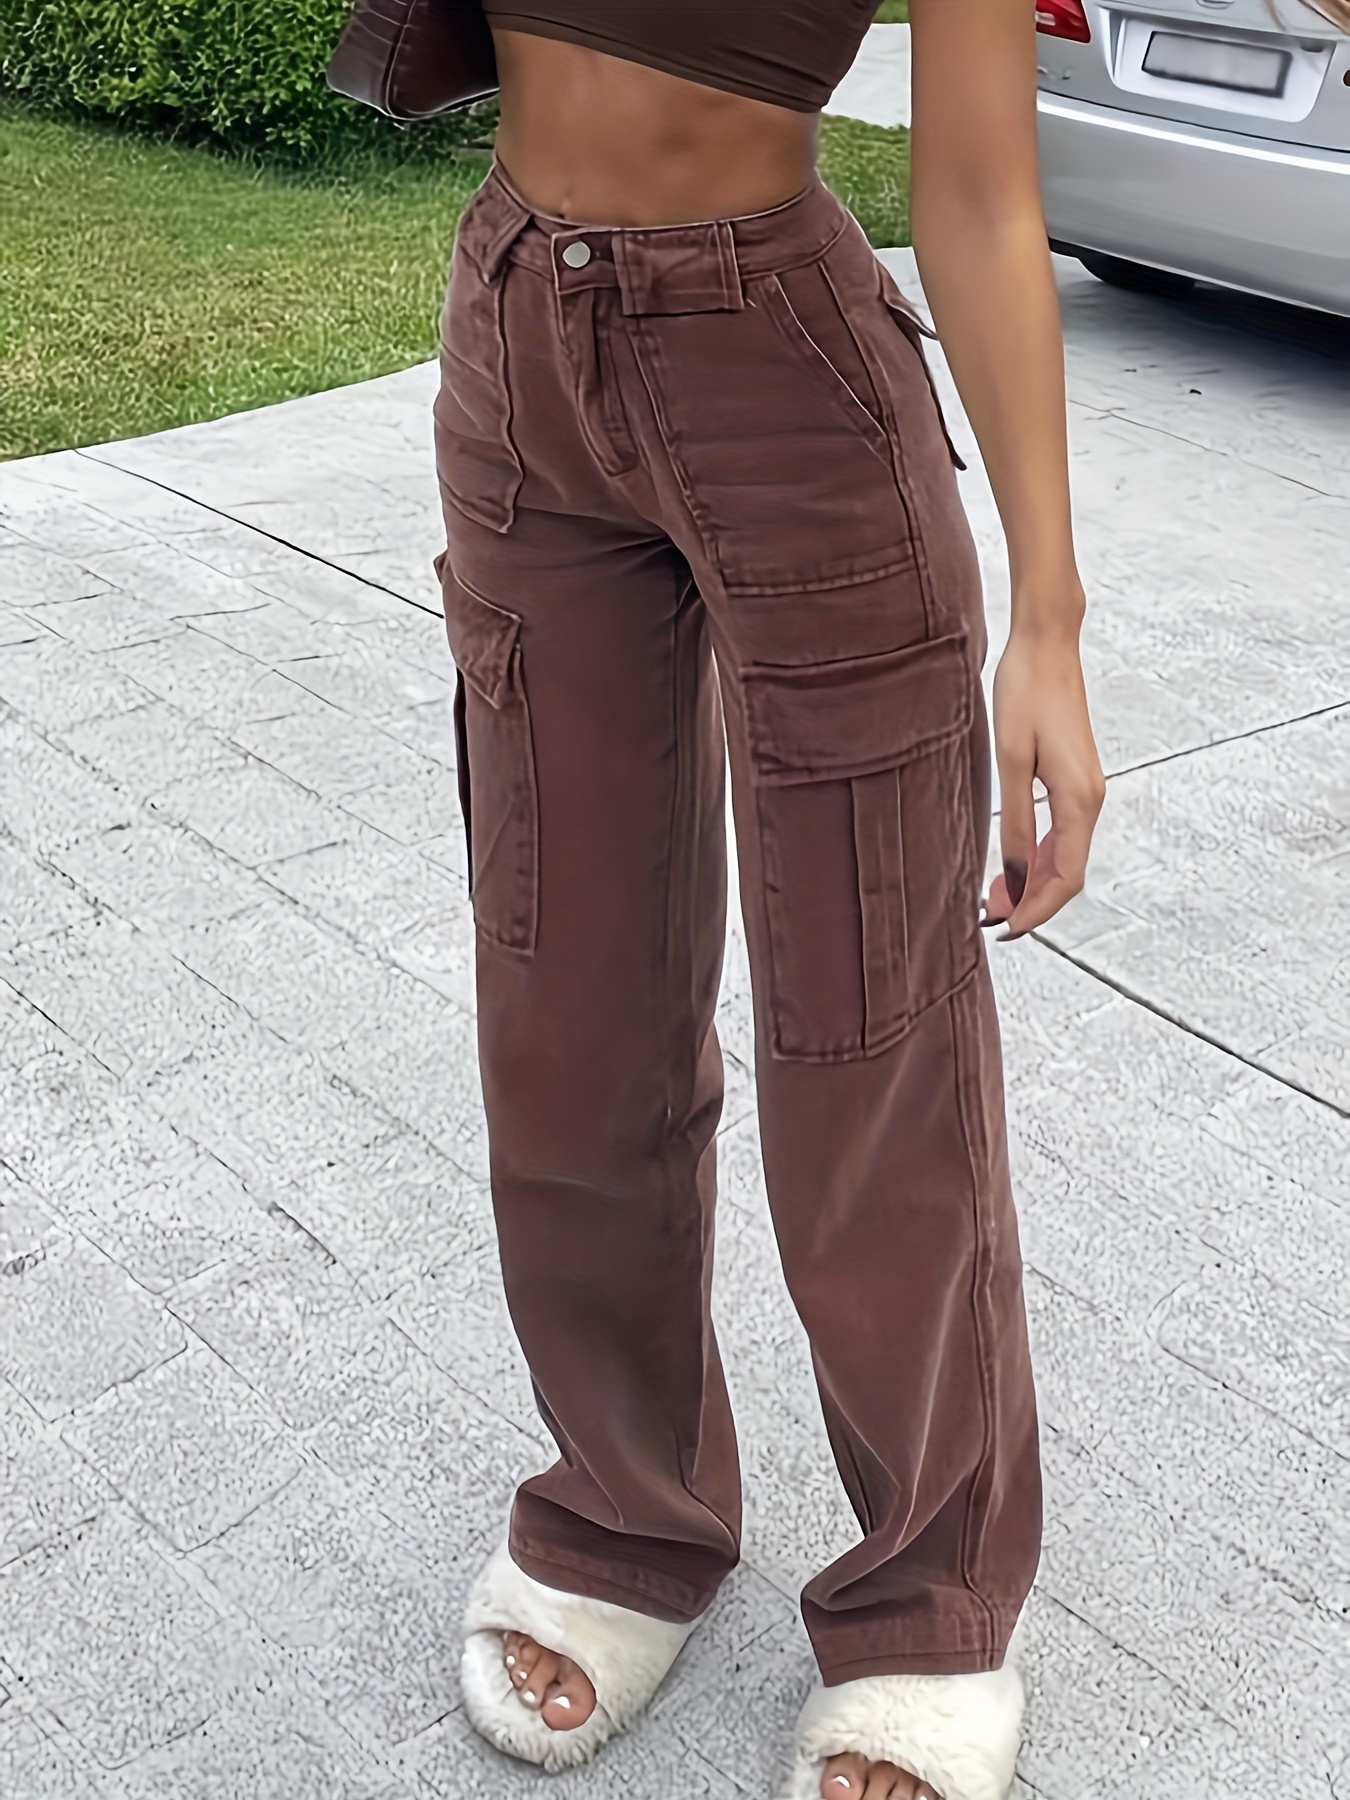 Dark Brown Corduroy Pants Stretch Trousers With Pockets Vintage Casual  Pants Women's Size 8 32 X 30 